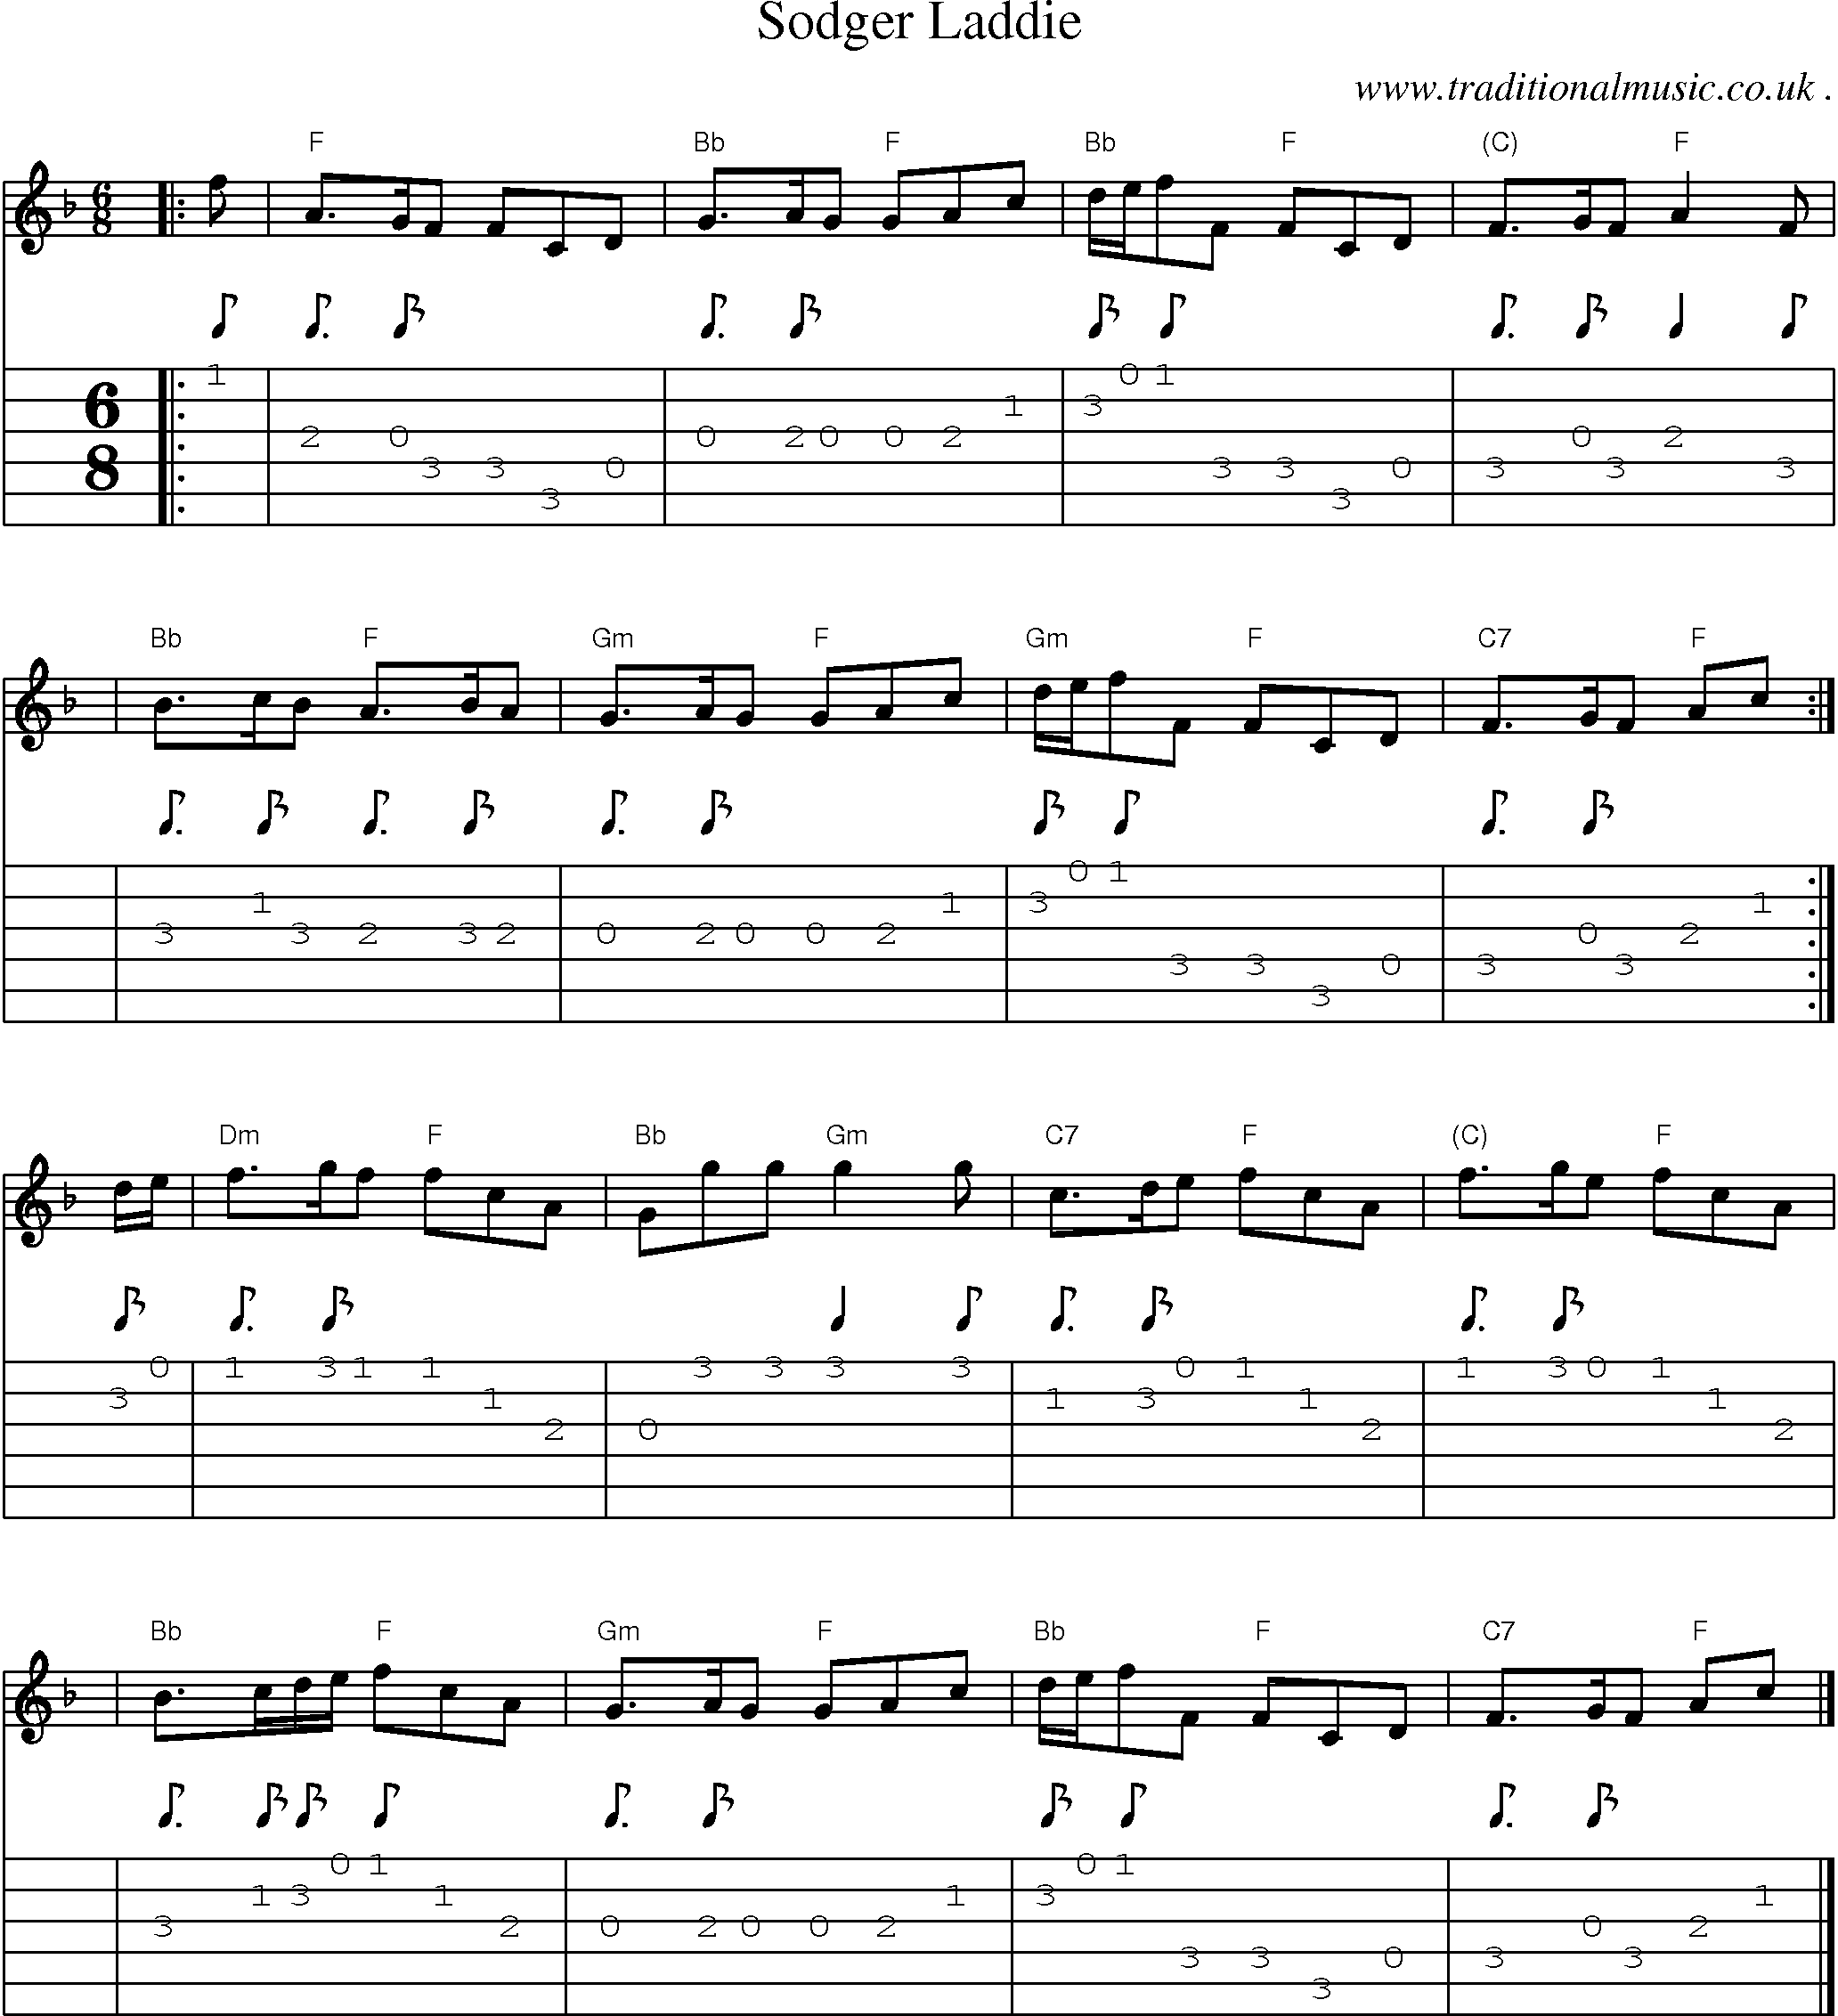 Sheet-music  score, Chords and Guitar Tabs for Sodger Laddie